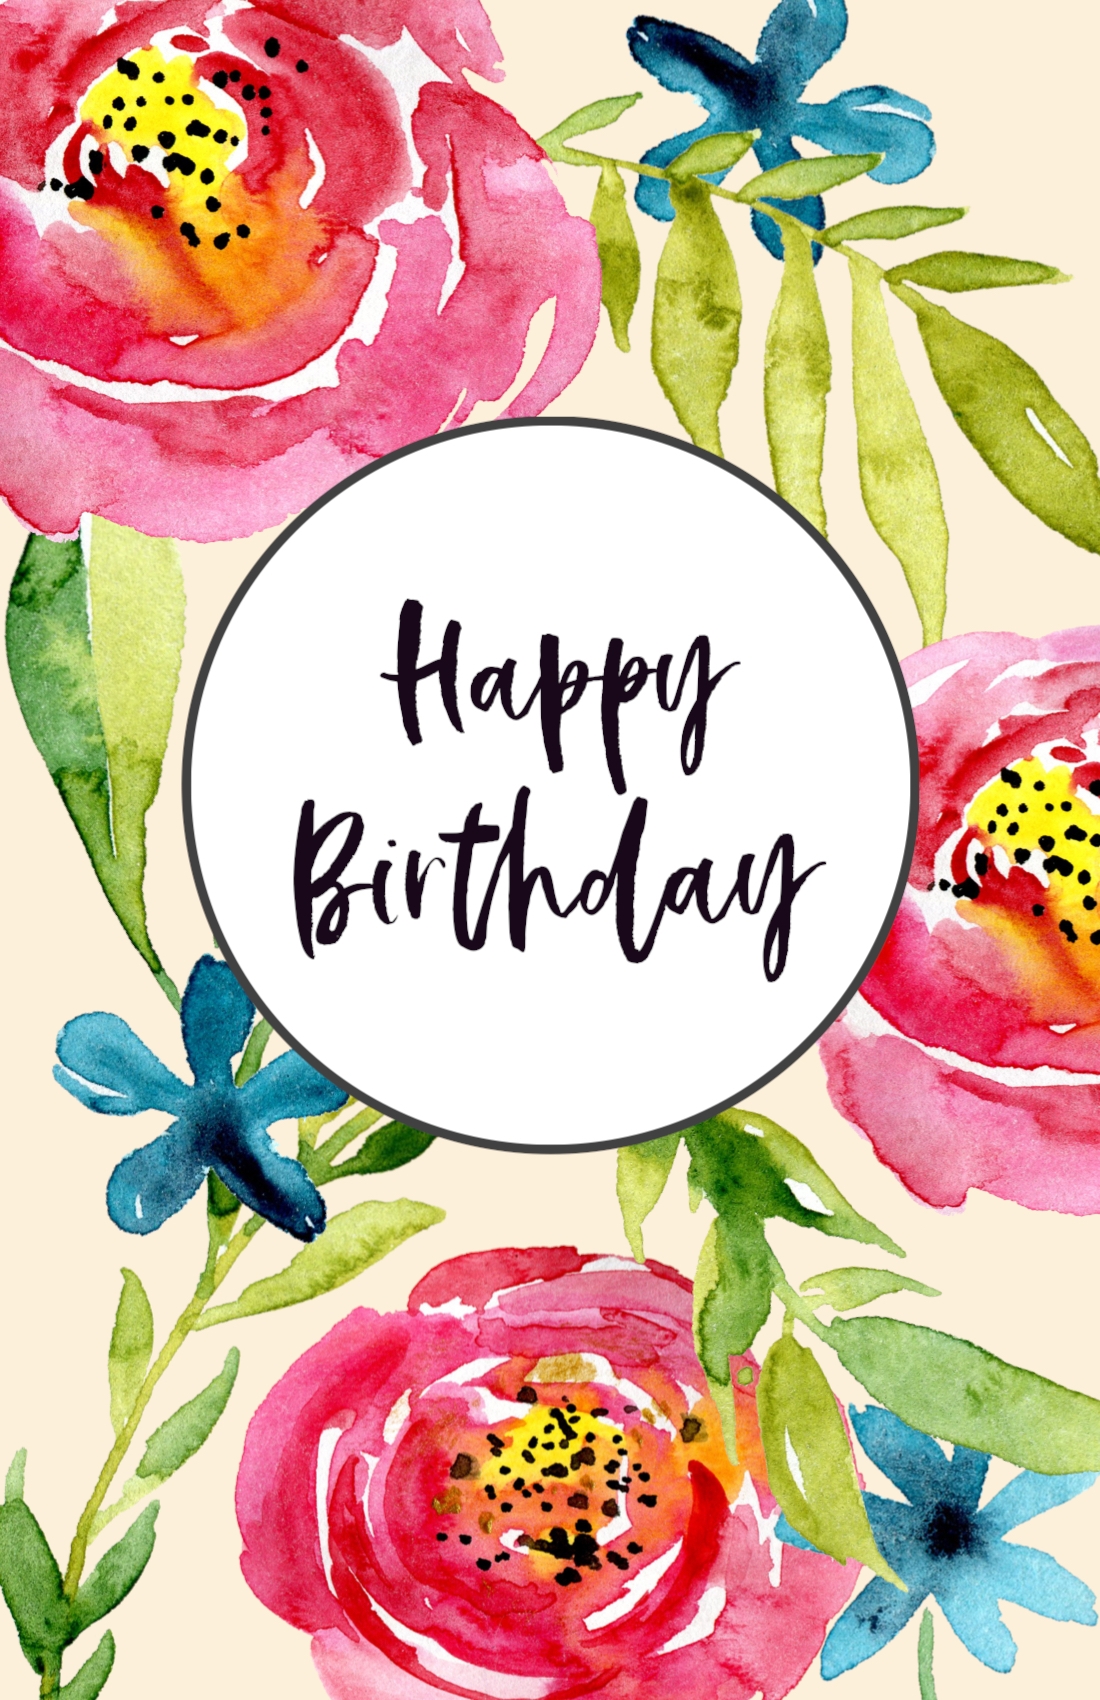 Free Printable Birthday Cards Paper Trail Design - Free Printable Birthday Cards For Her